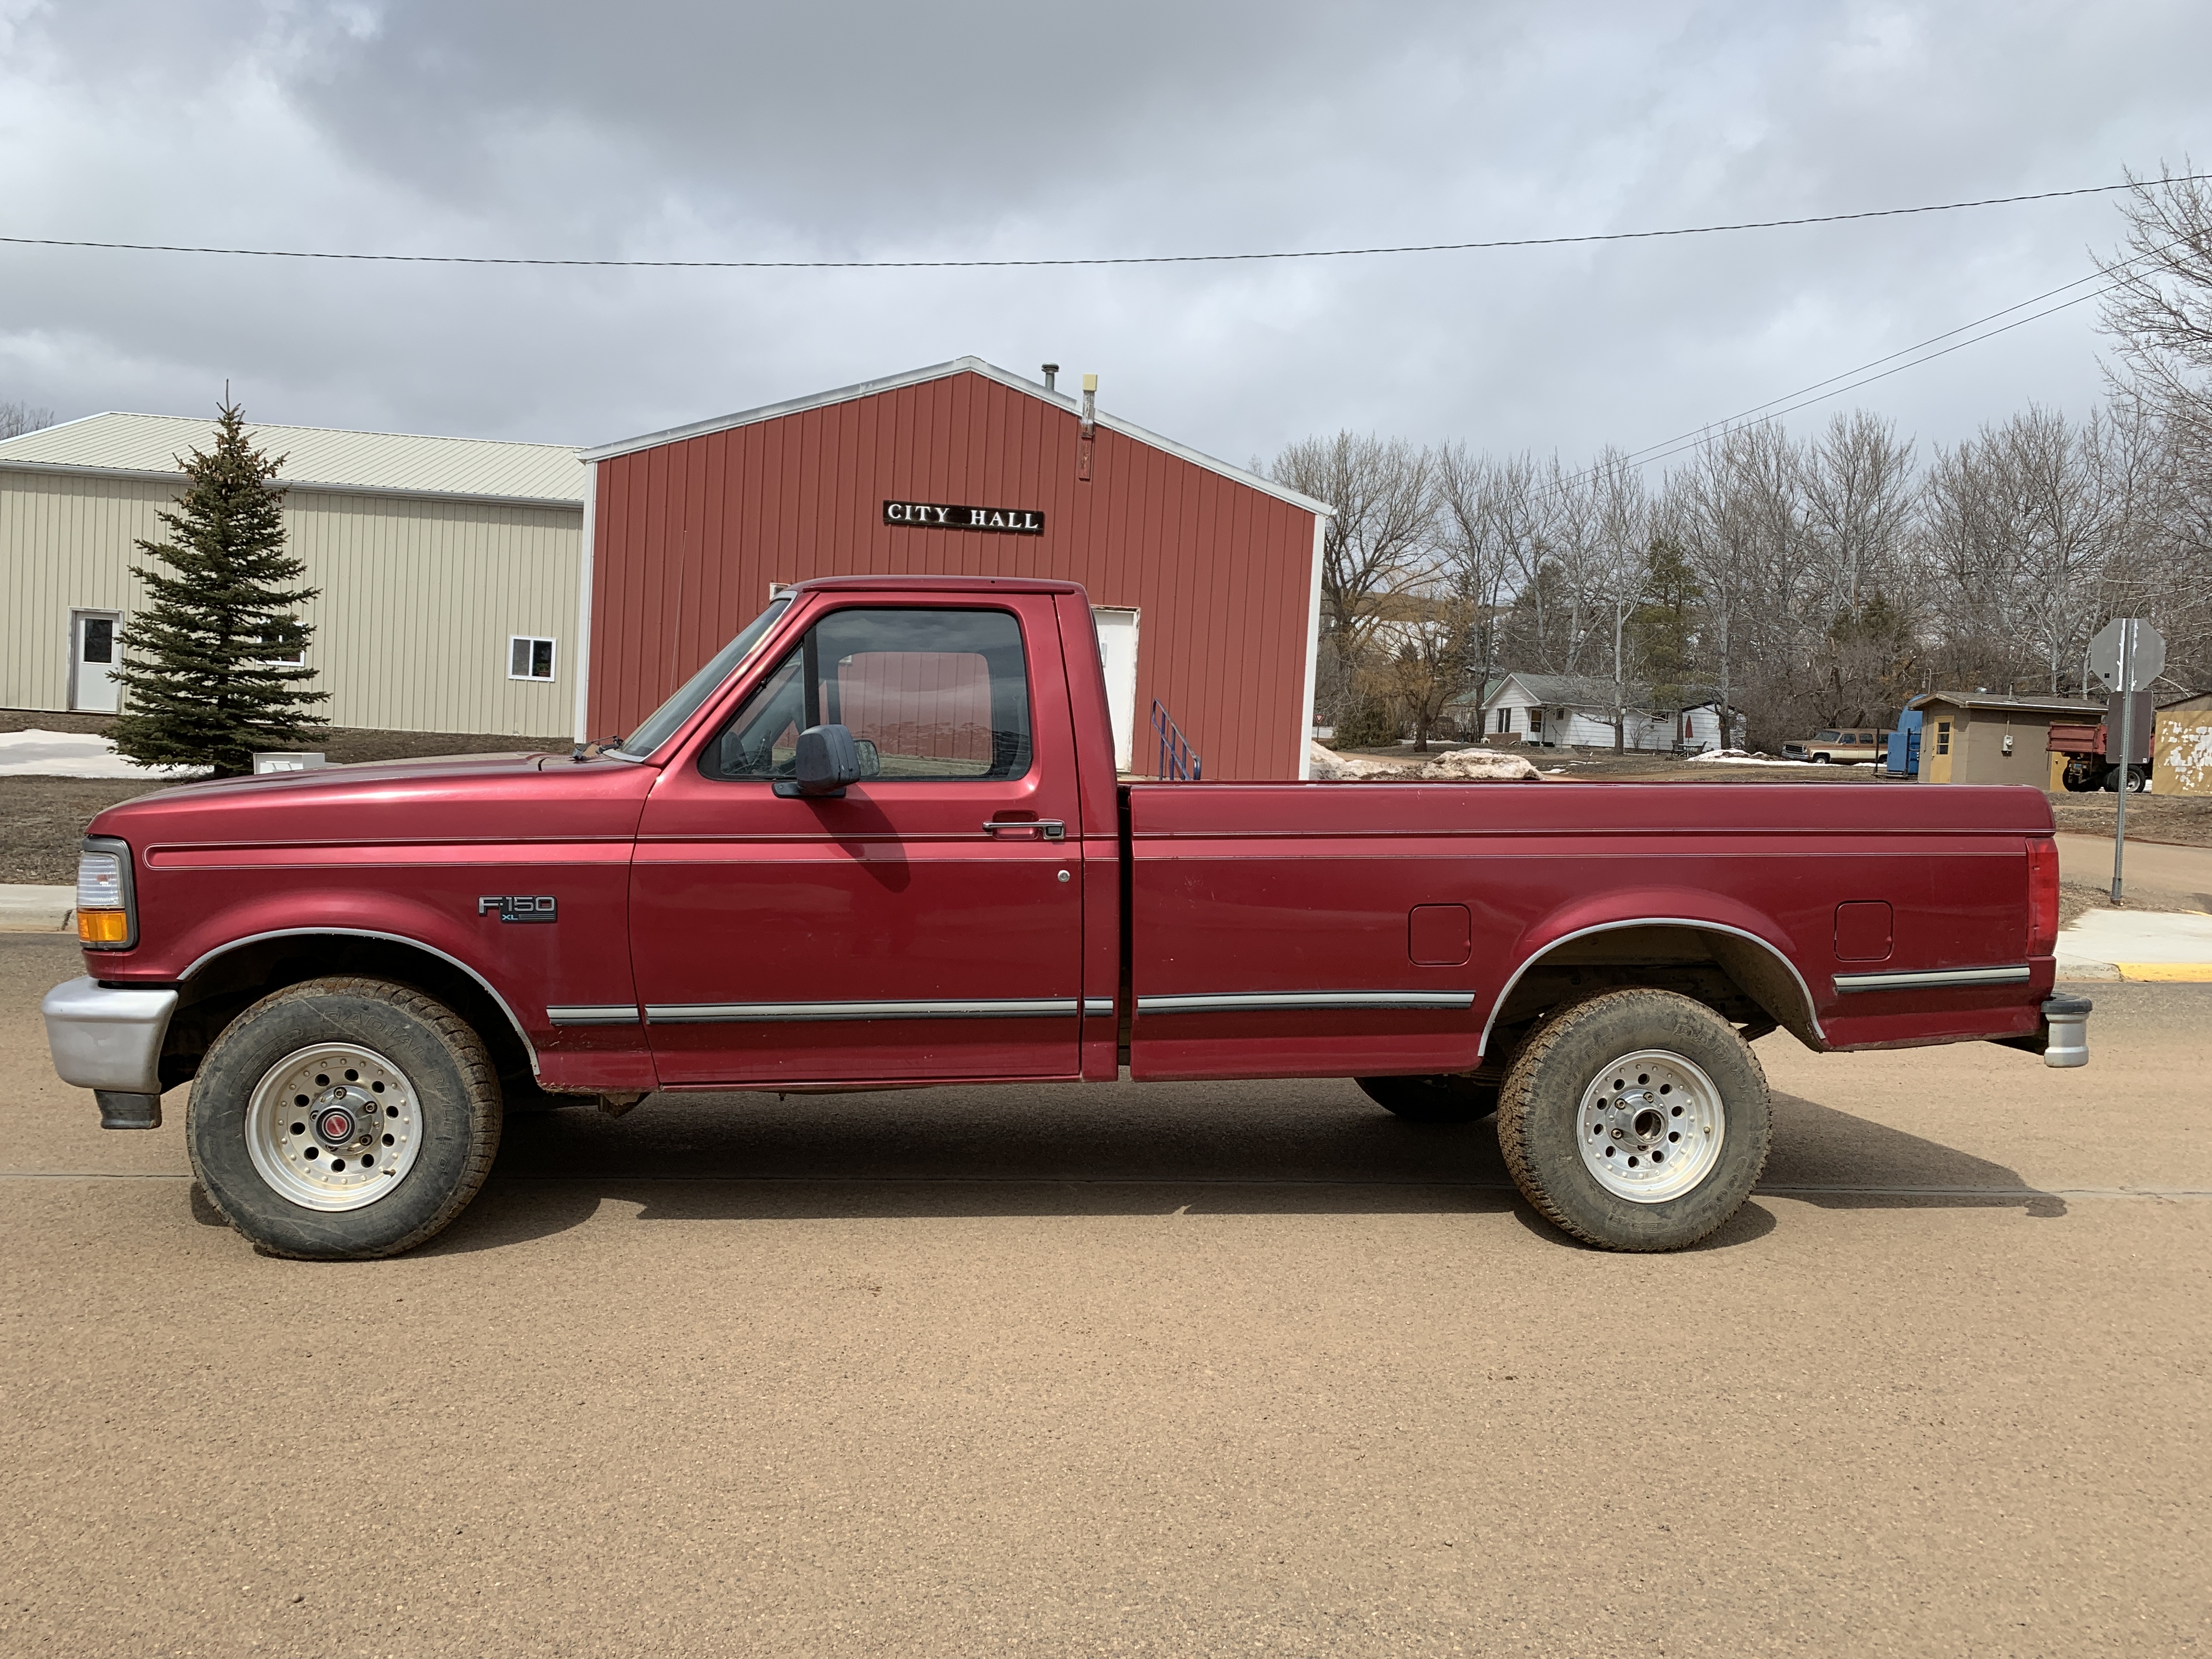 Used 1995 Ford F-150 Trucks for Sale Near Me 